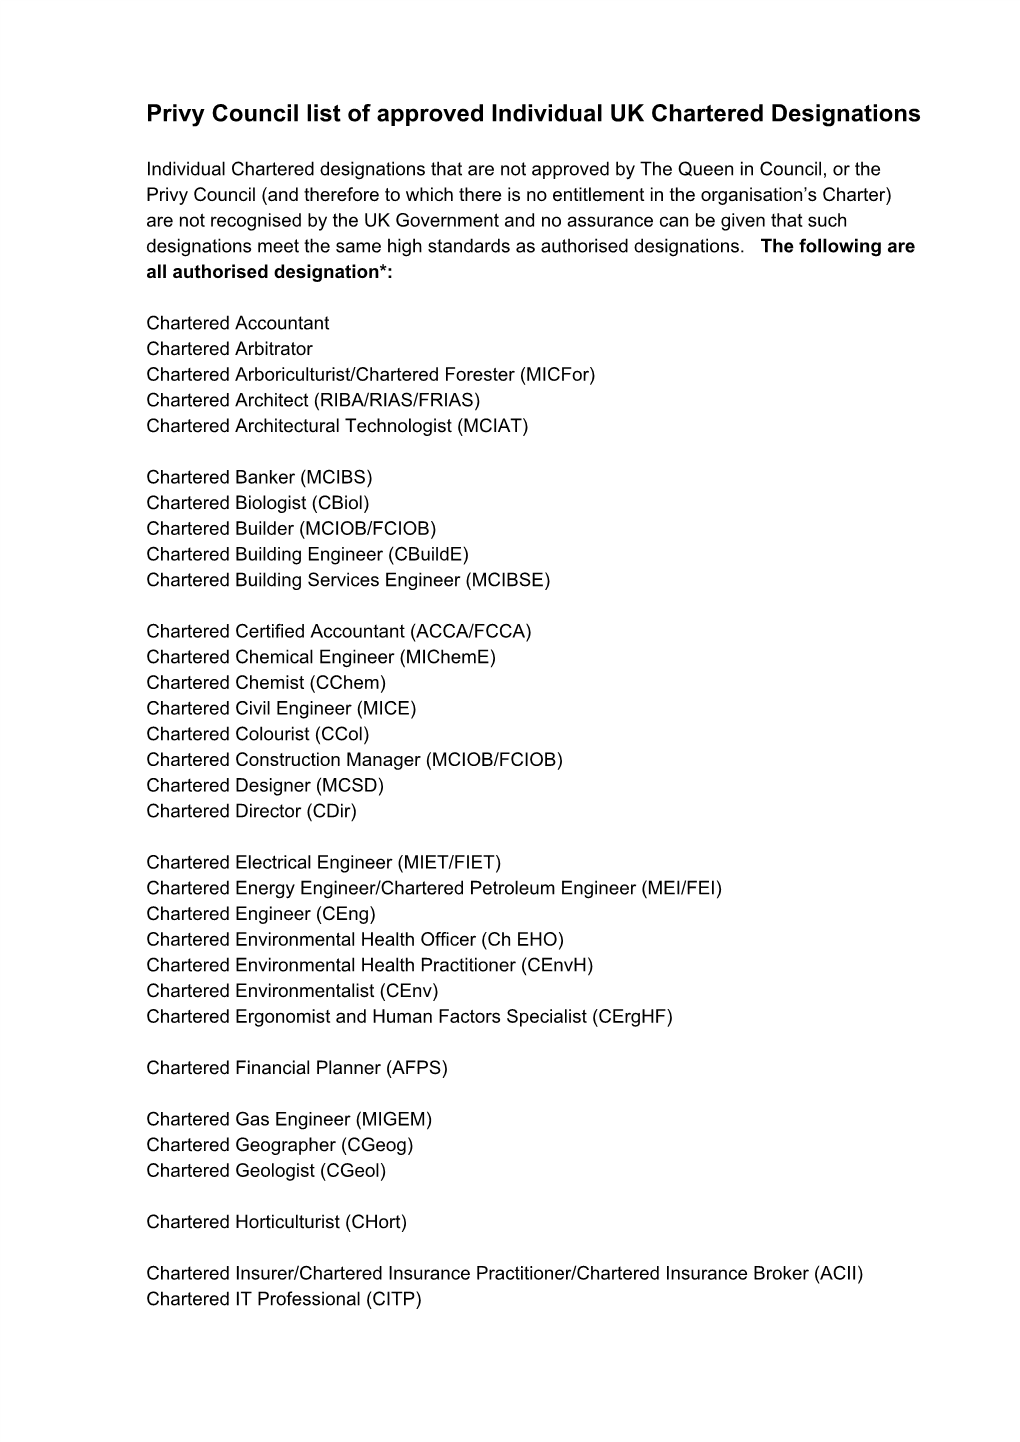 Privy Council List of Approved Individual UK Chartered Designations